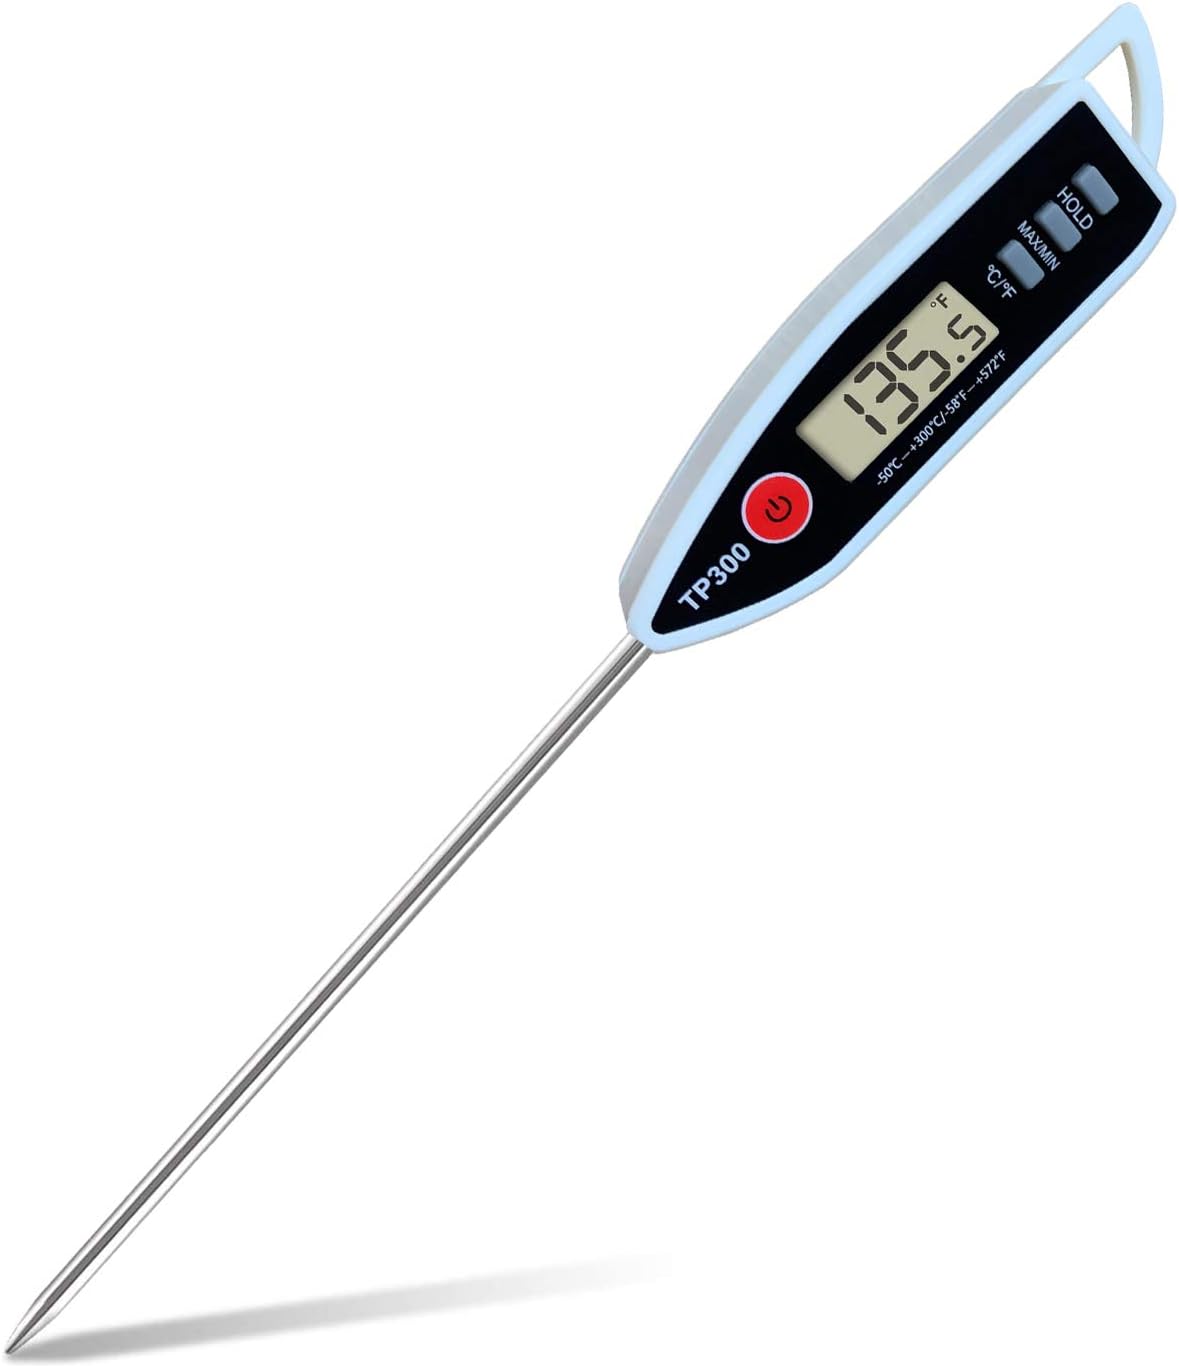 Meat Food Thermometer, Digital Candy Candle [...]